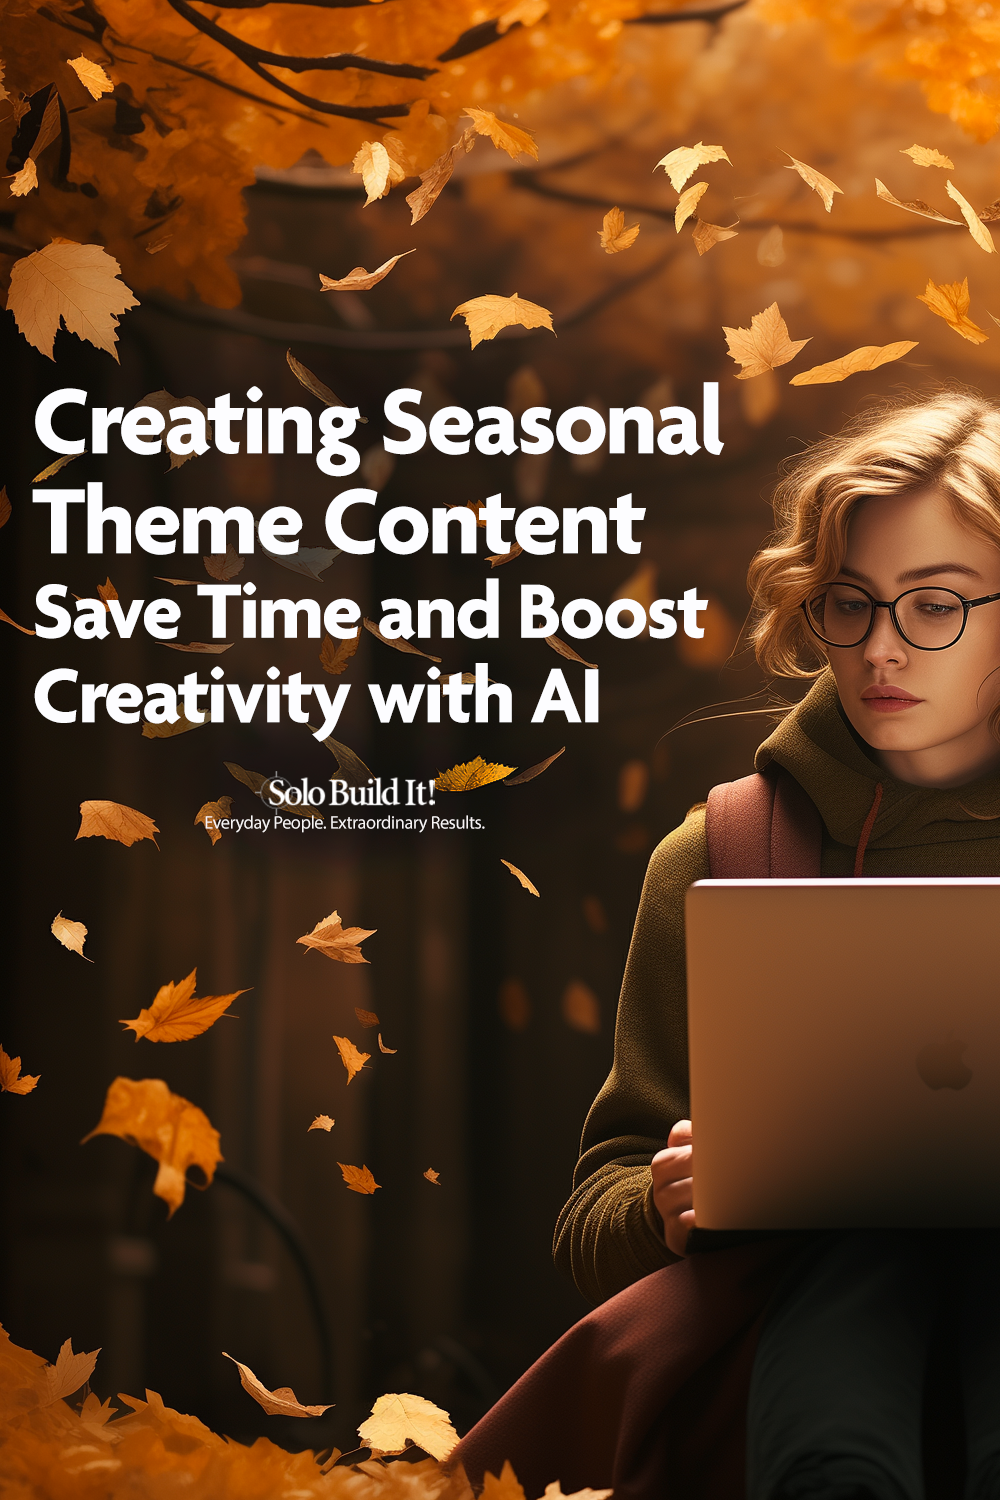 Creating Seasonal Theme Content - Save Time and Boost Creativity with AI